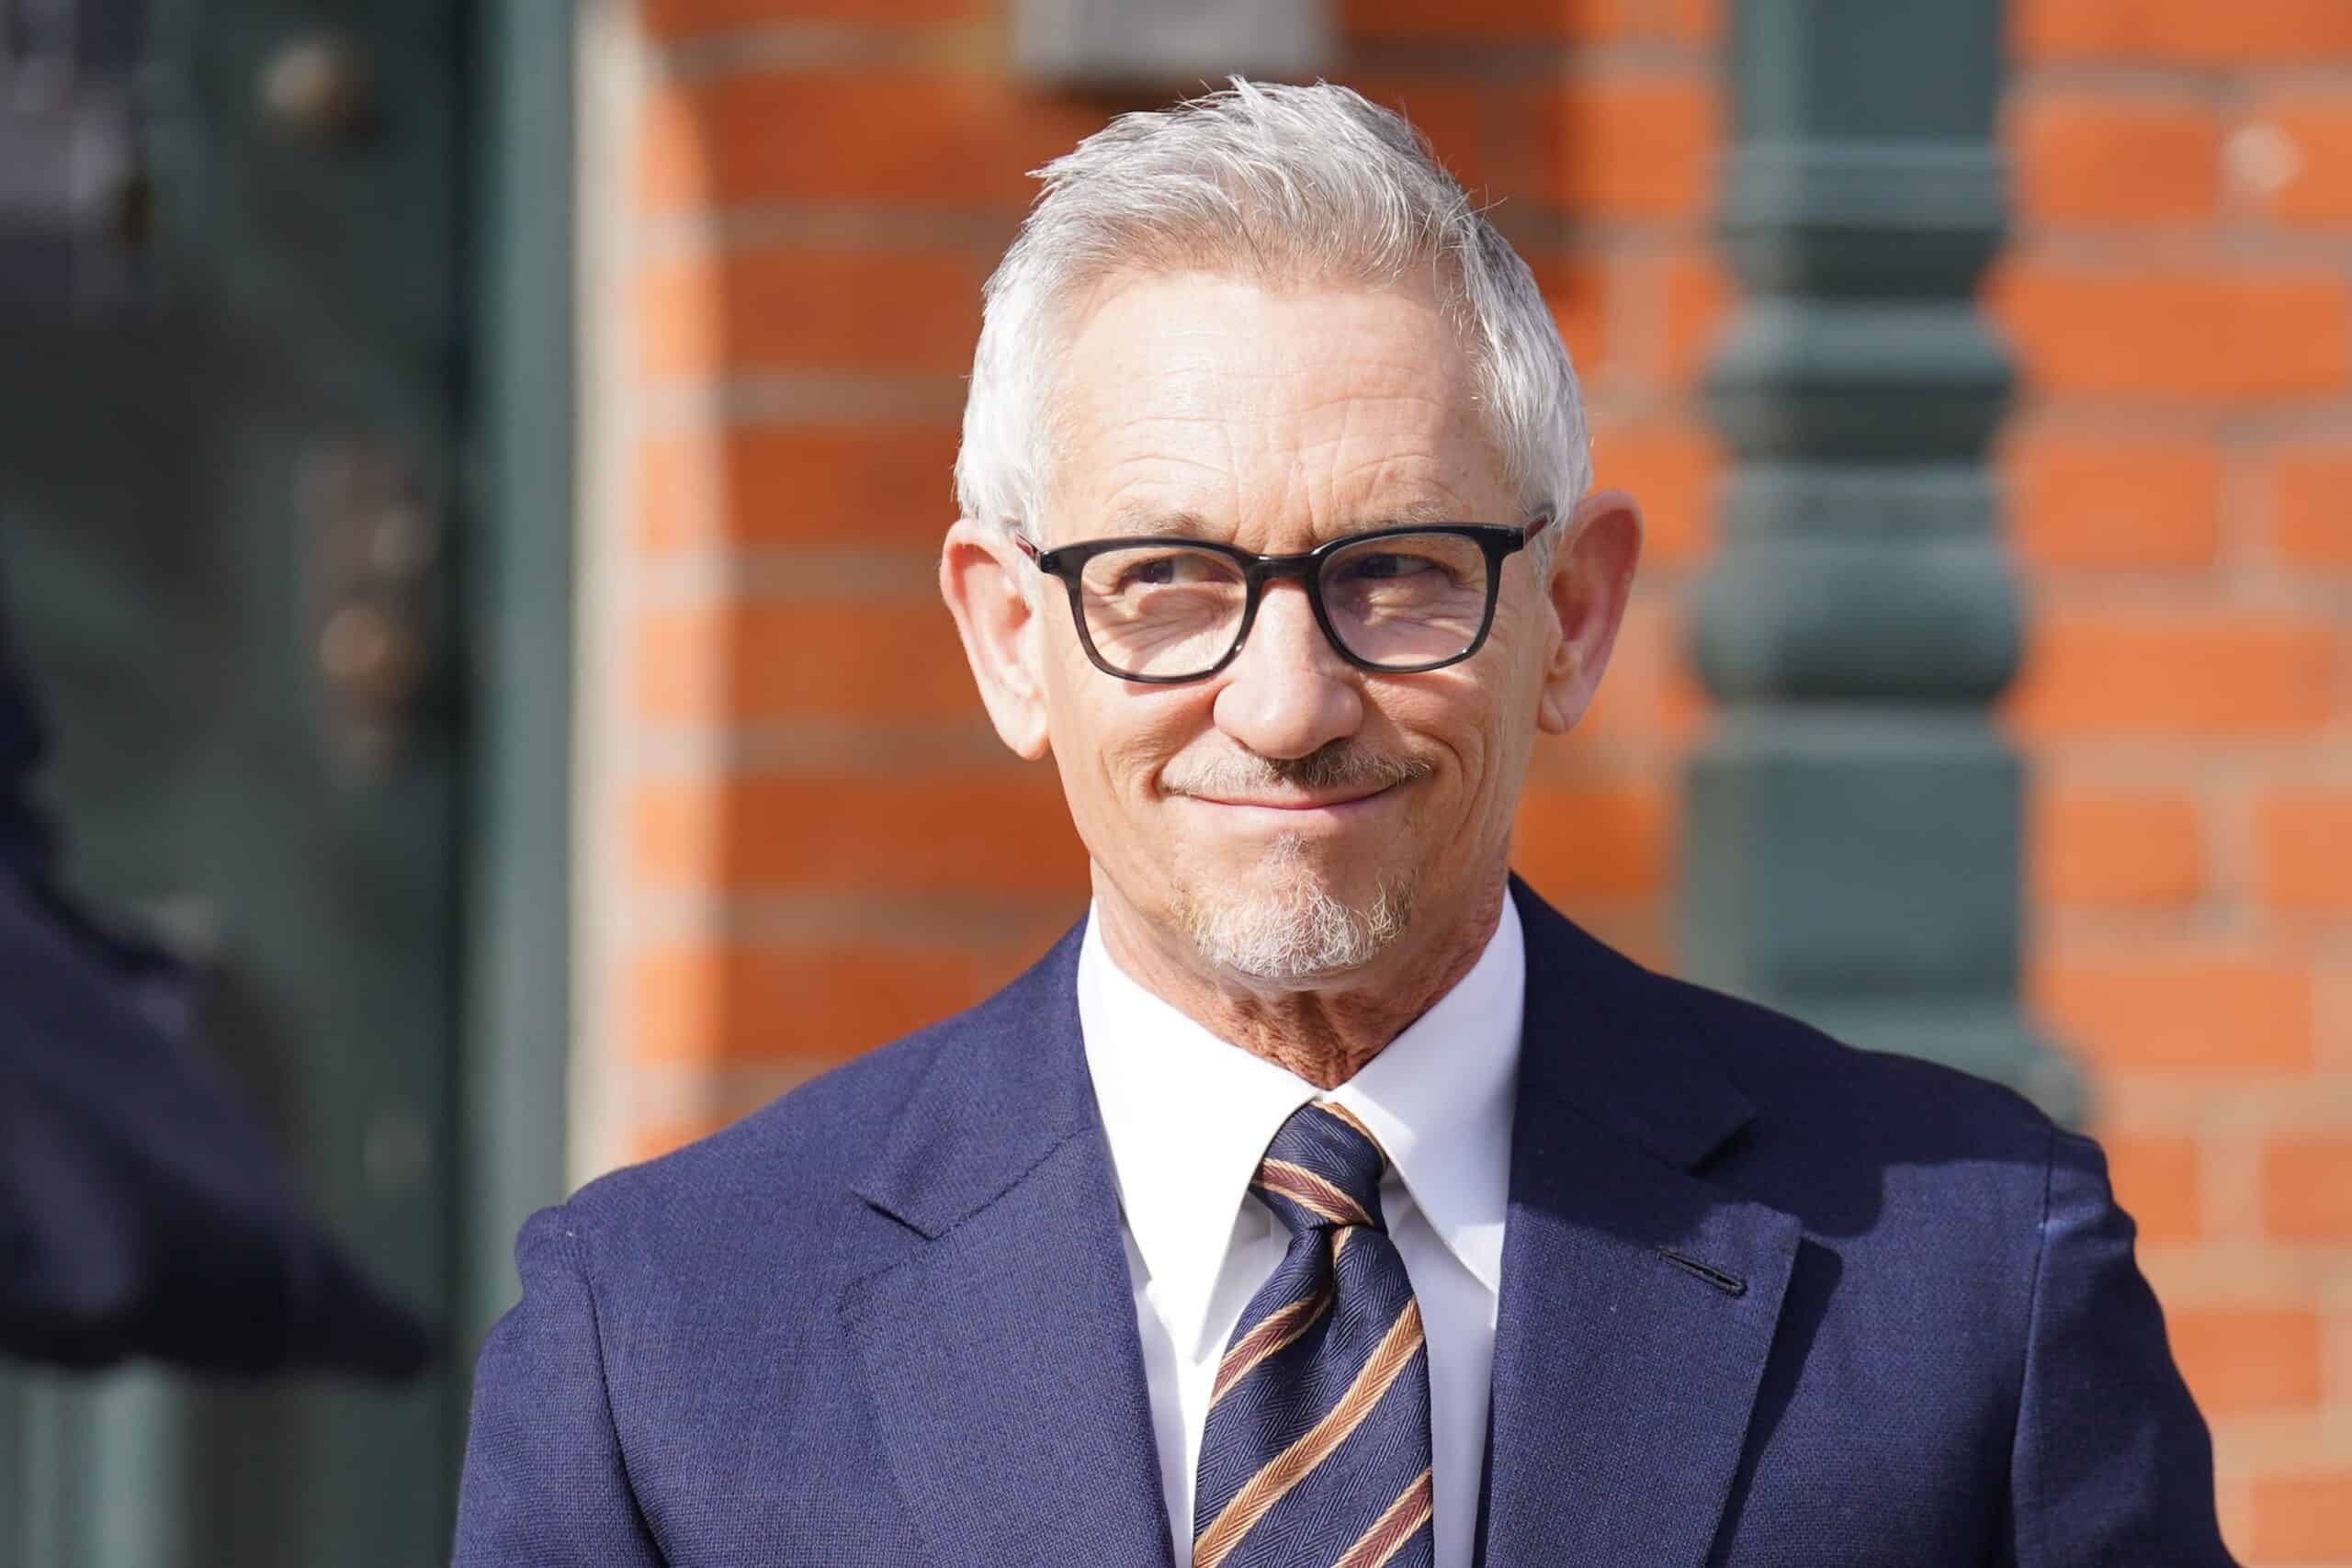 Lineker thought he had ‘special agreement’ with Tim Davie over tweets says agent